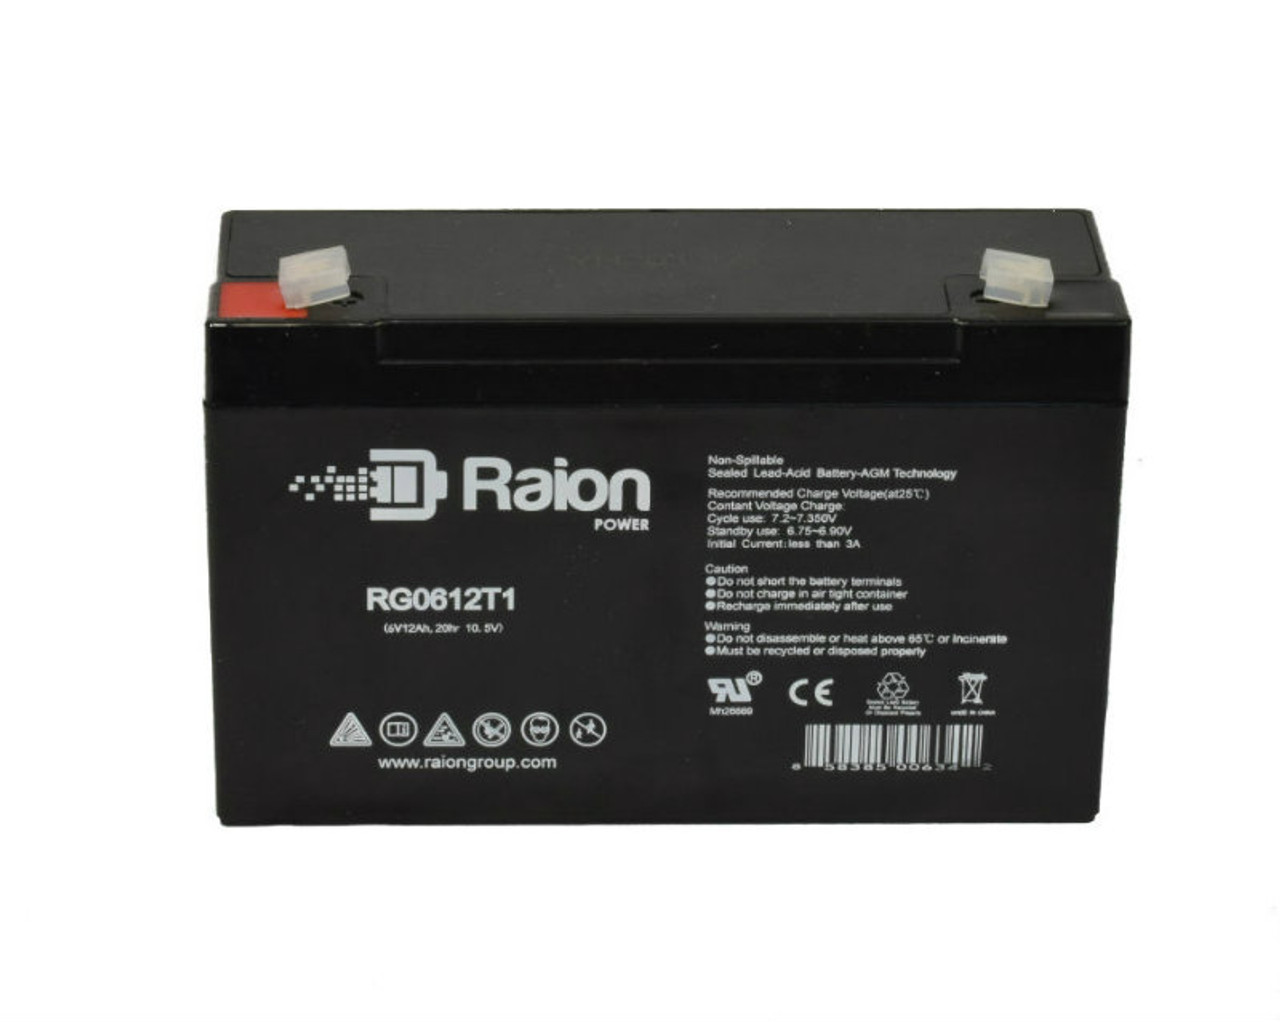 Raion Power RG06120T1 Replacement Battery Cartridge for Upsonic PCM 80